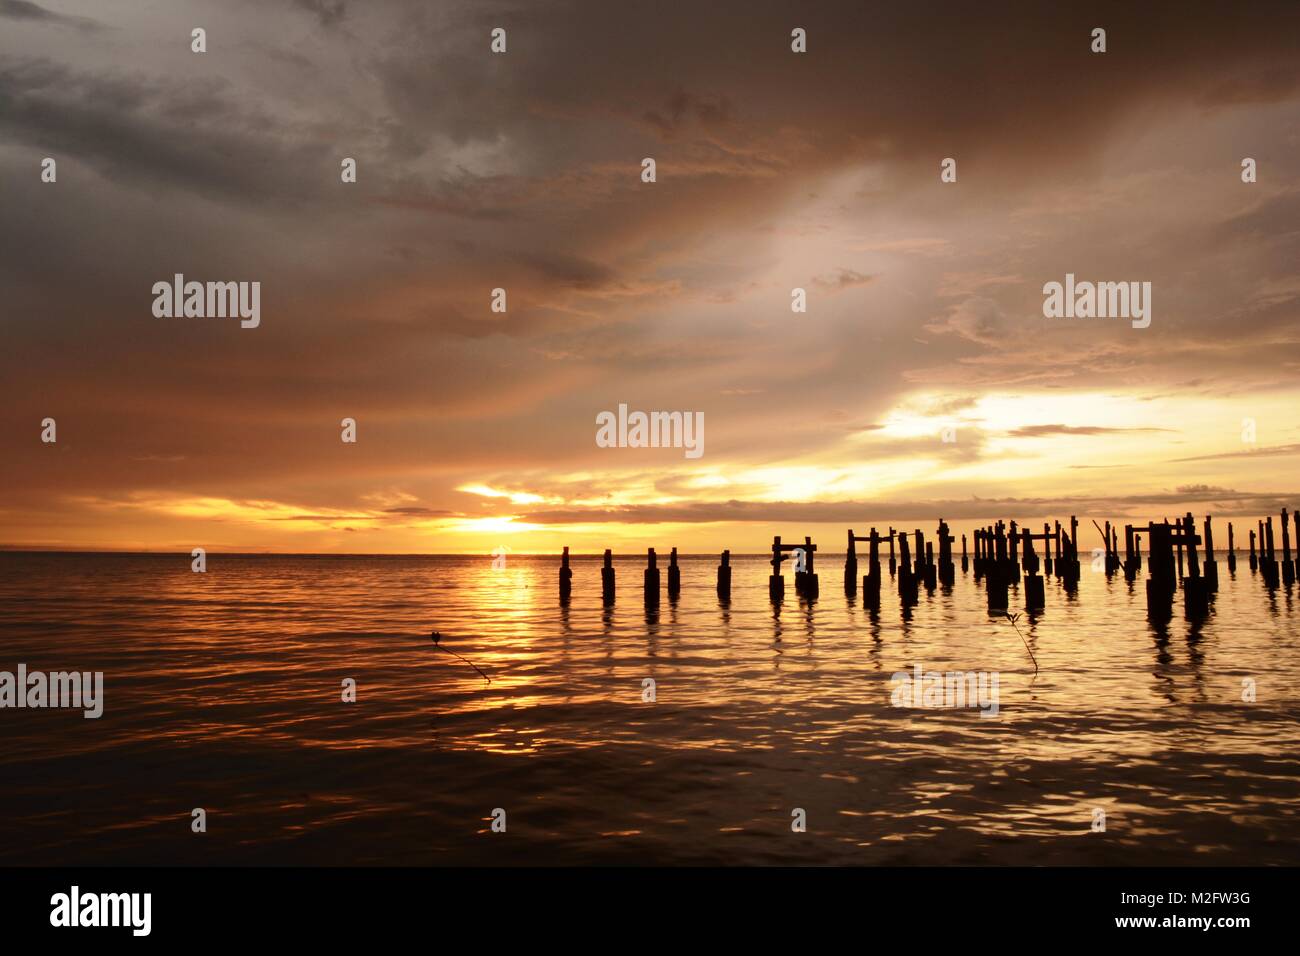 dilapidated wood pilings off the North Borneo Coast Stock Photo